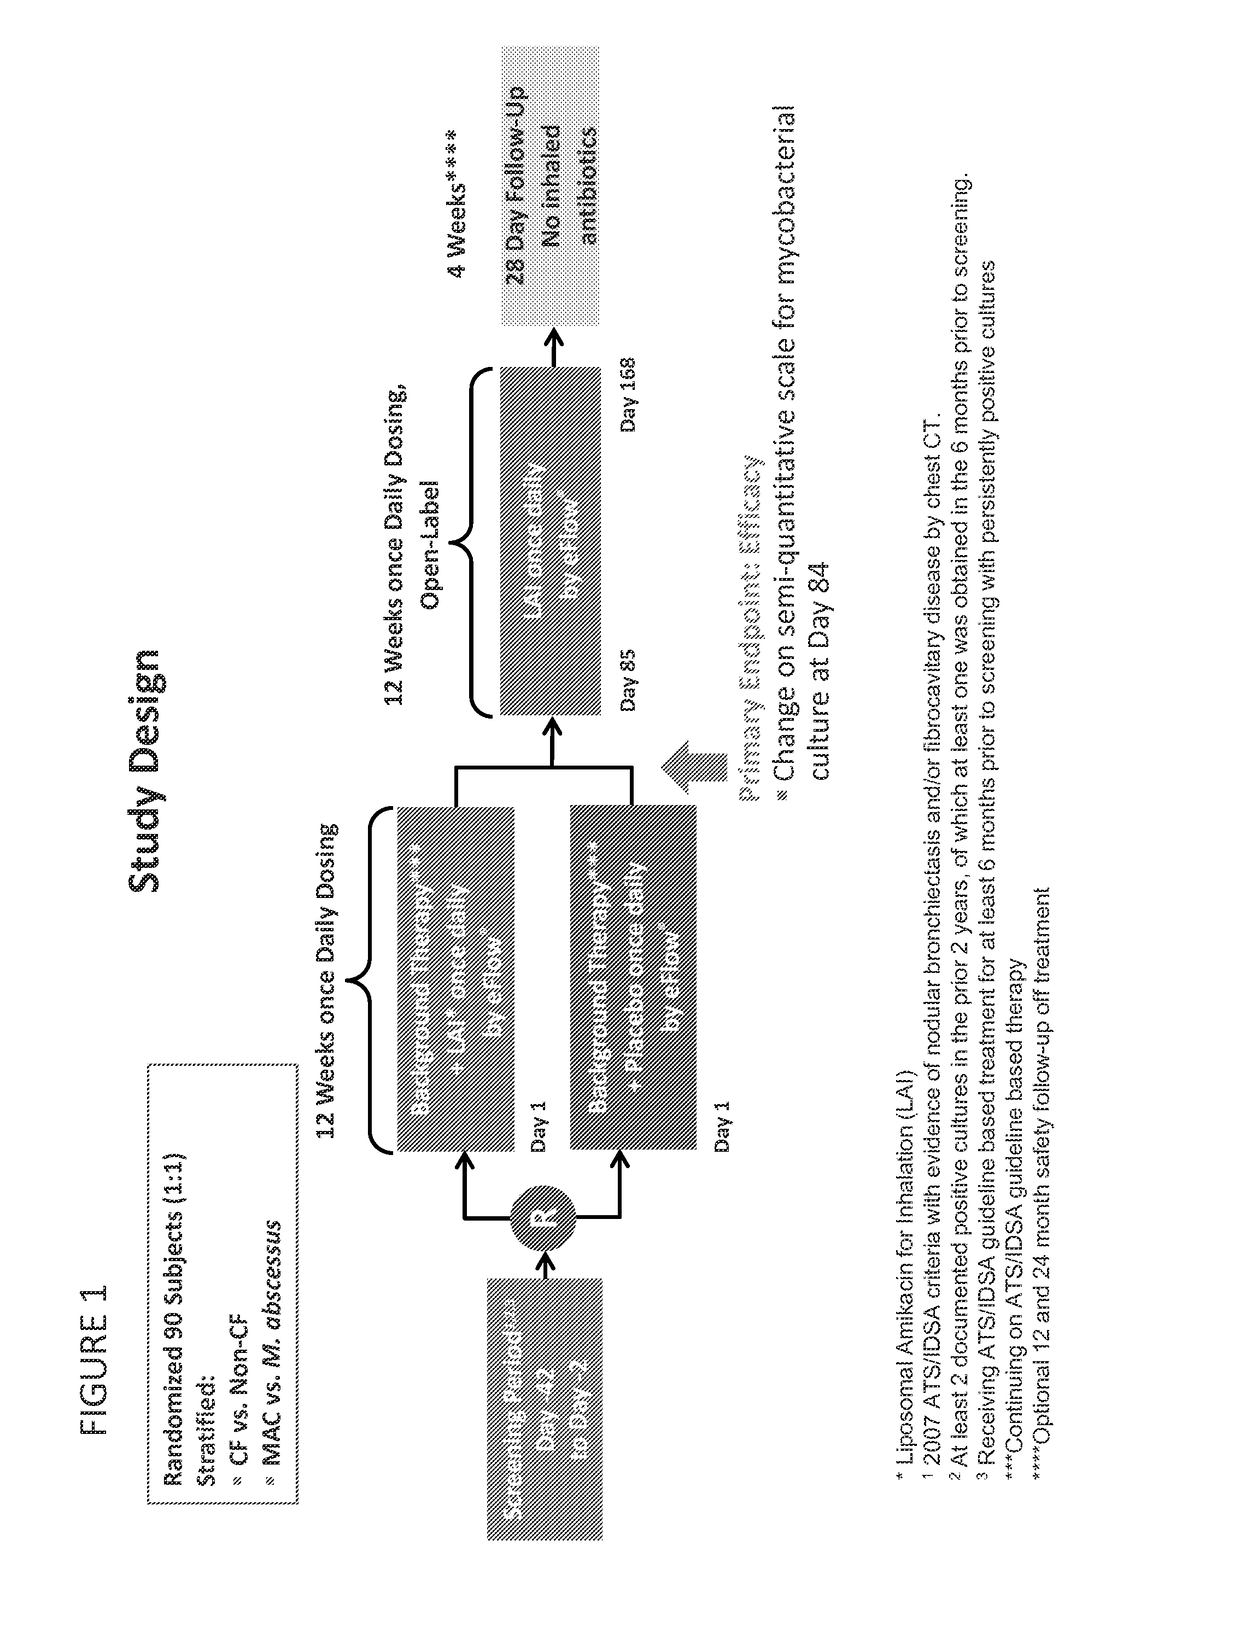 Methods for treating pulmonary non-tuberculous mycobacterial infections